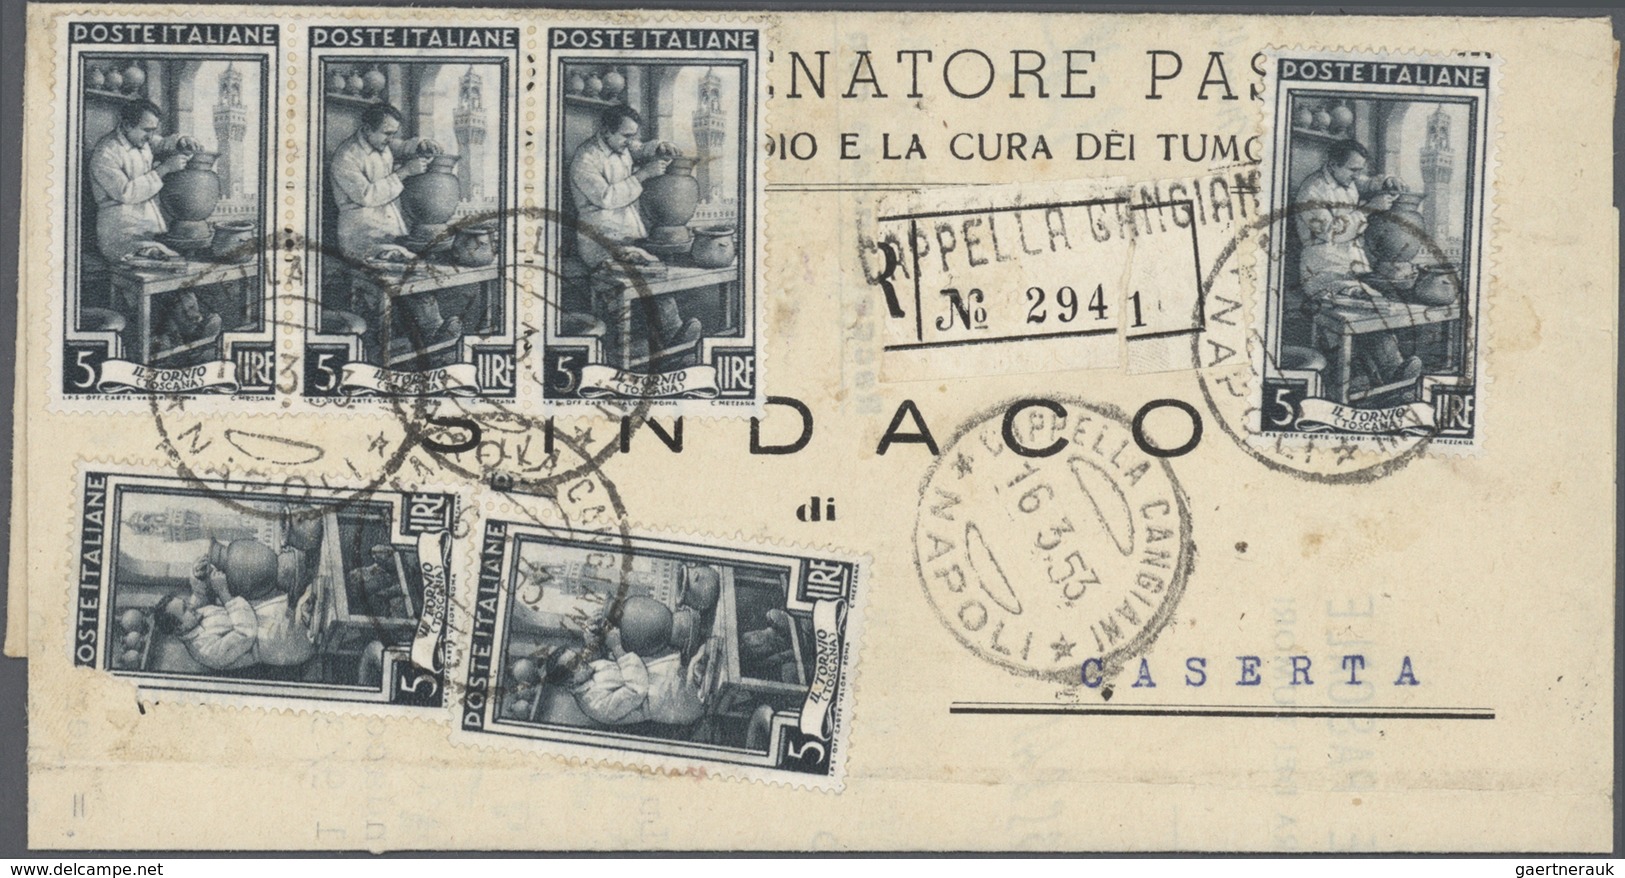 Br Italien: 1951/1954, Collection Of Apprx. 120 Commercial Entires Bearing Frankings "Italia Al Lavoro" - Marcophilie